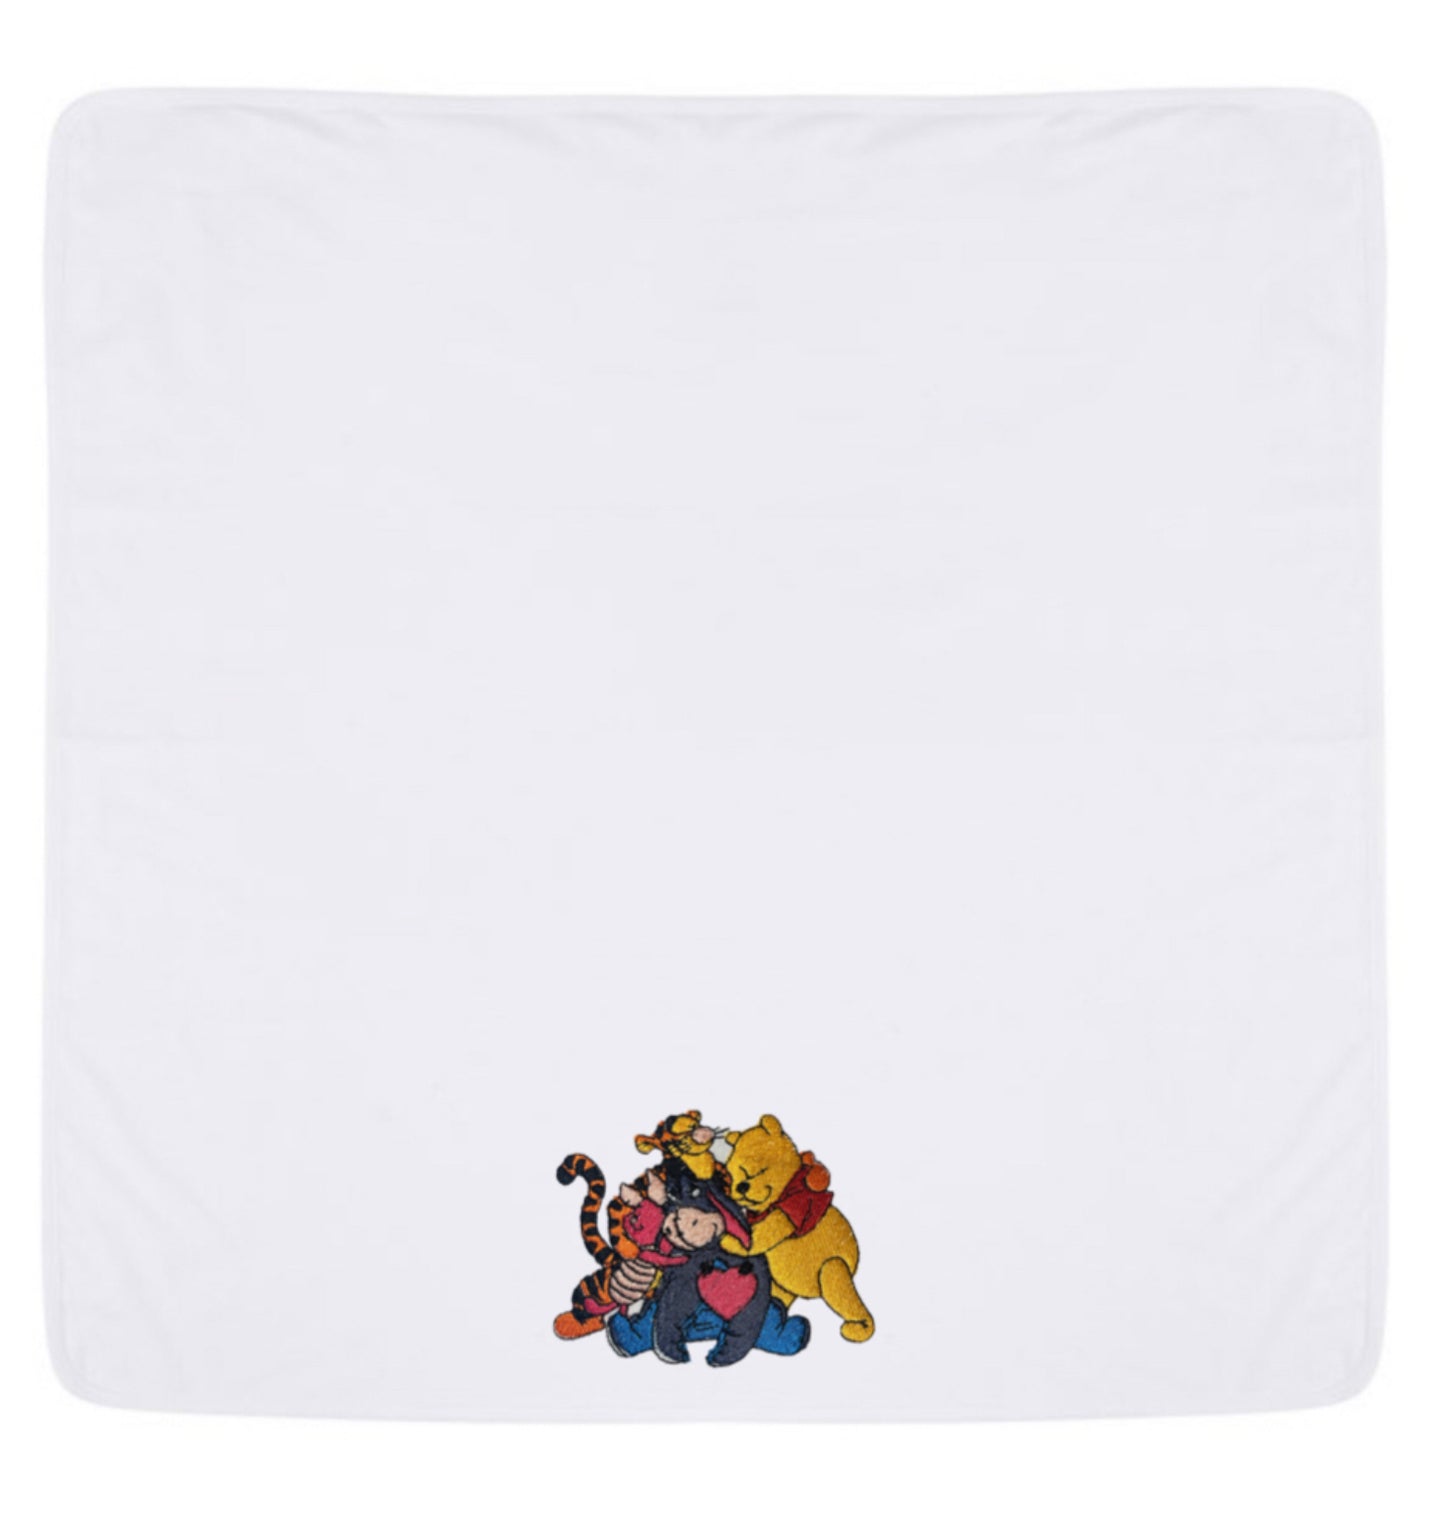 Winnie The Pooh & Friends Blanket available in White, Pink or Blue